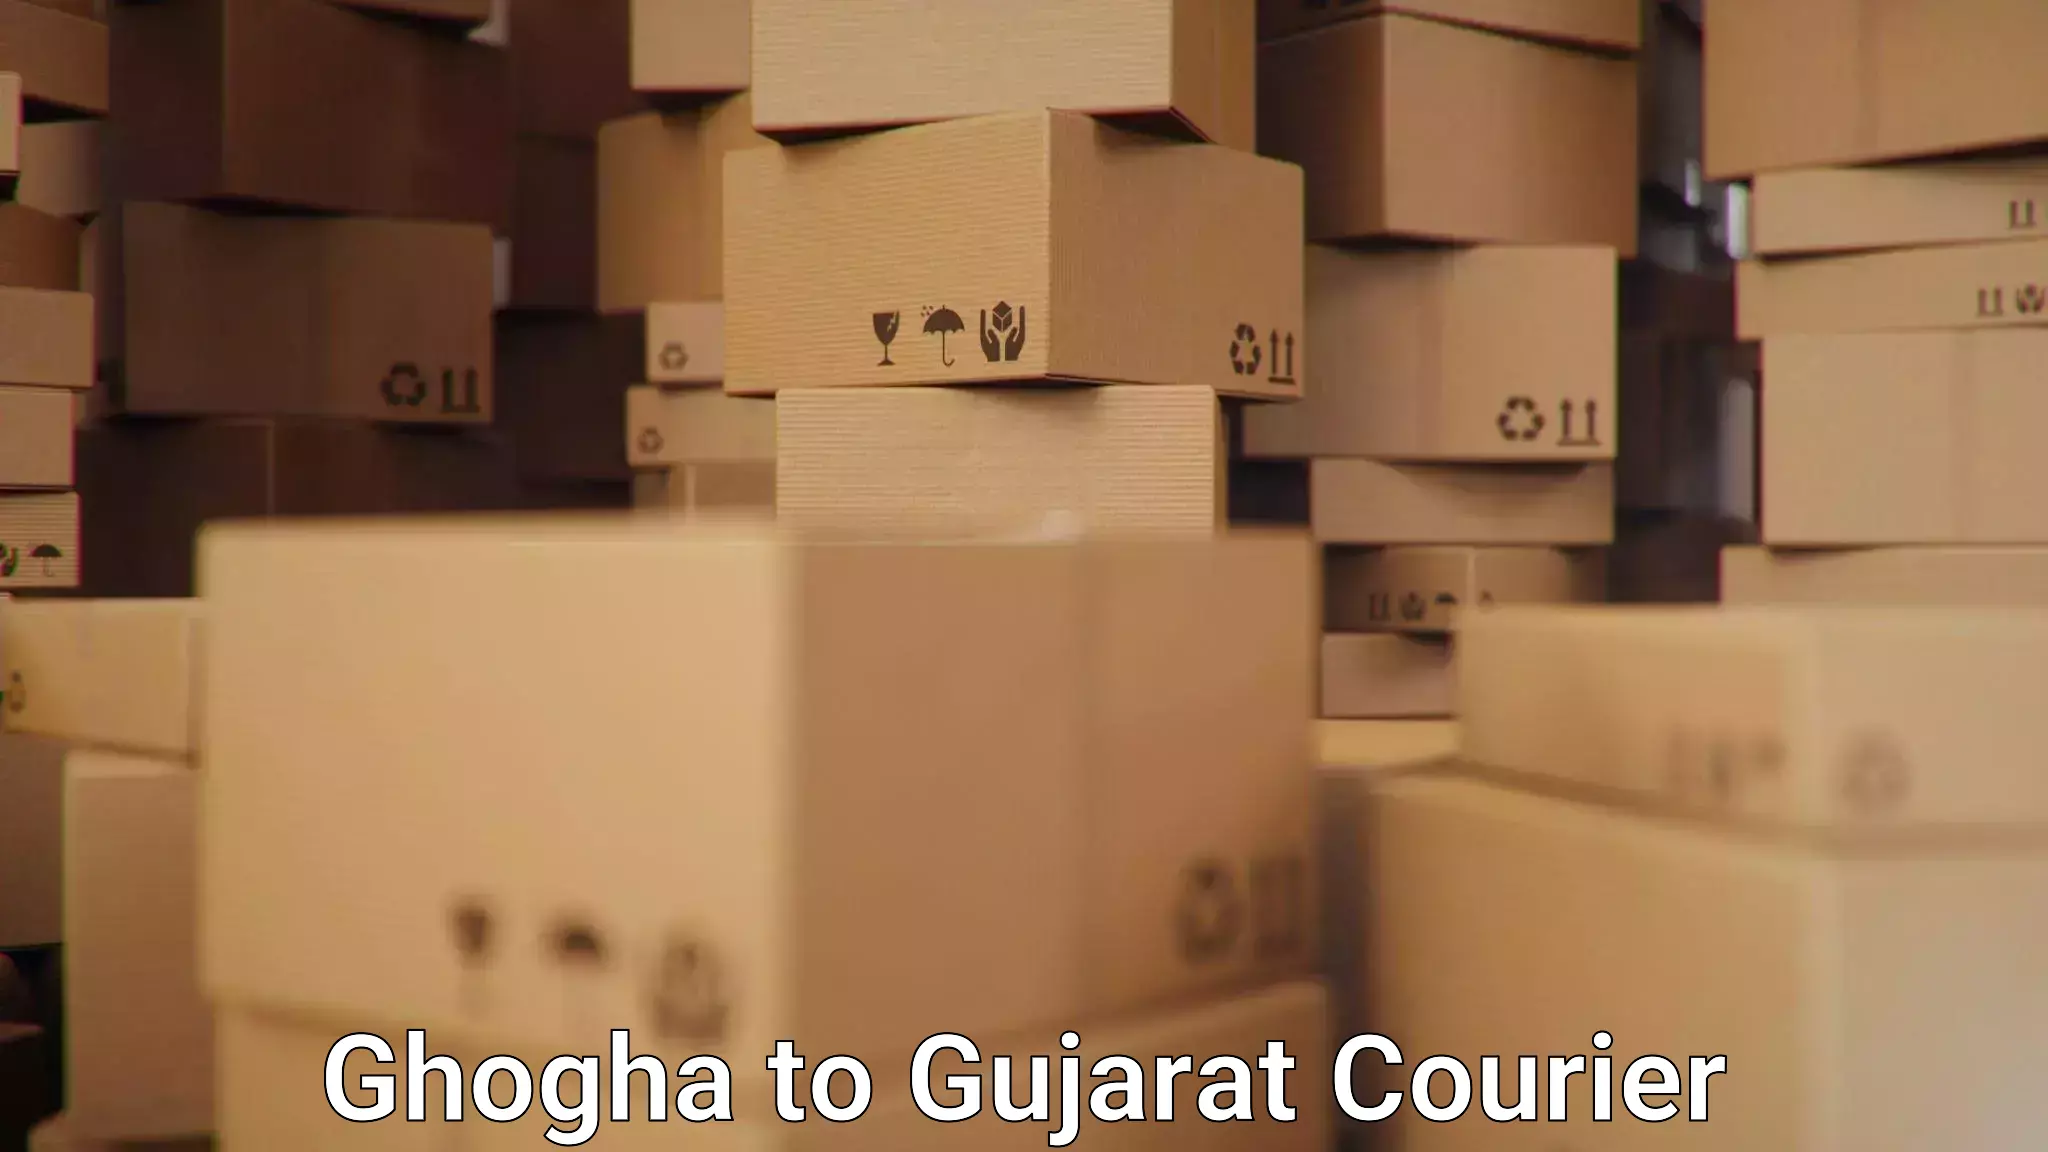 Courier service innovation Ghogha to Songadh